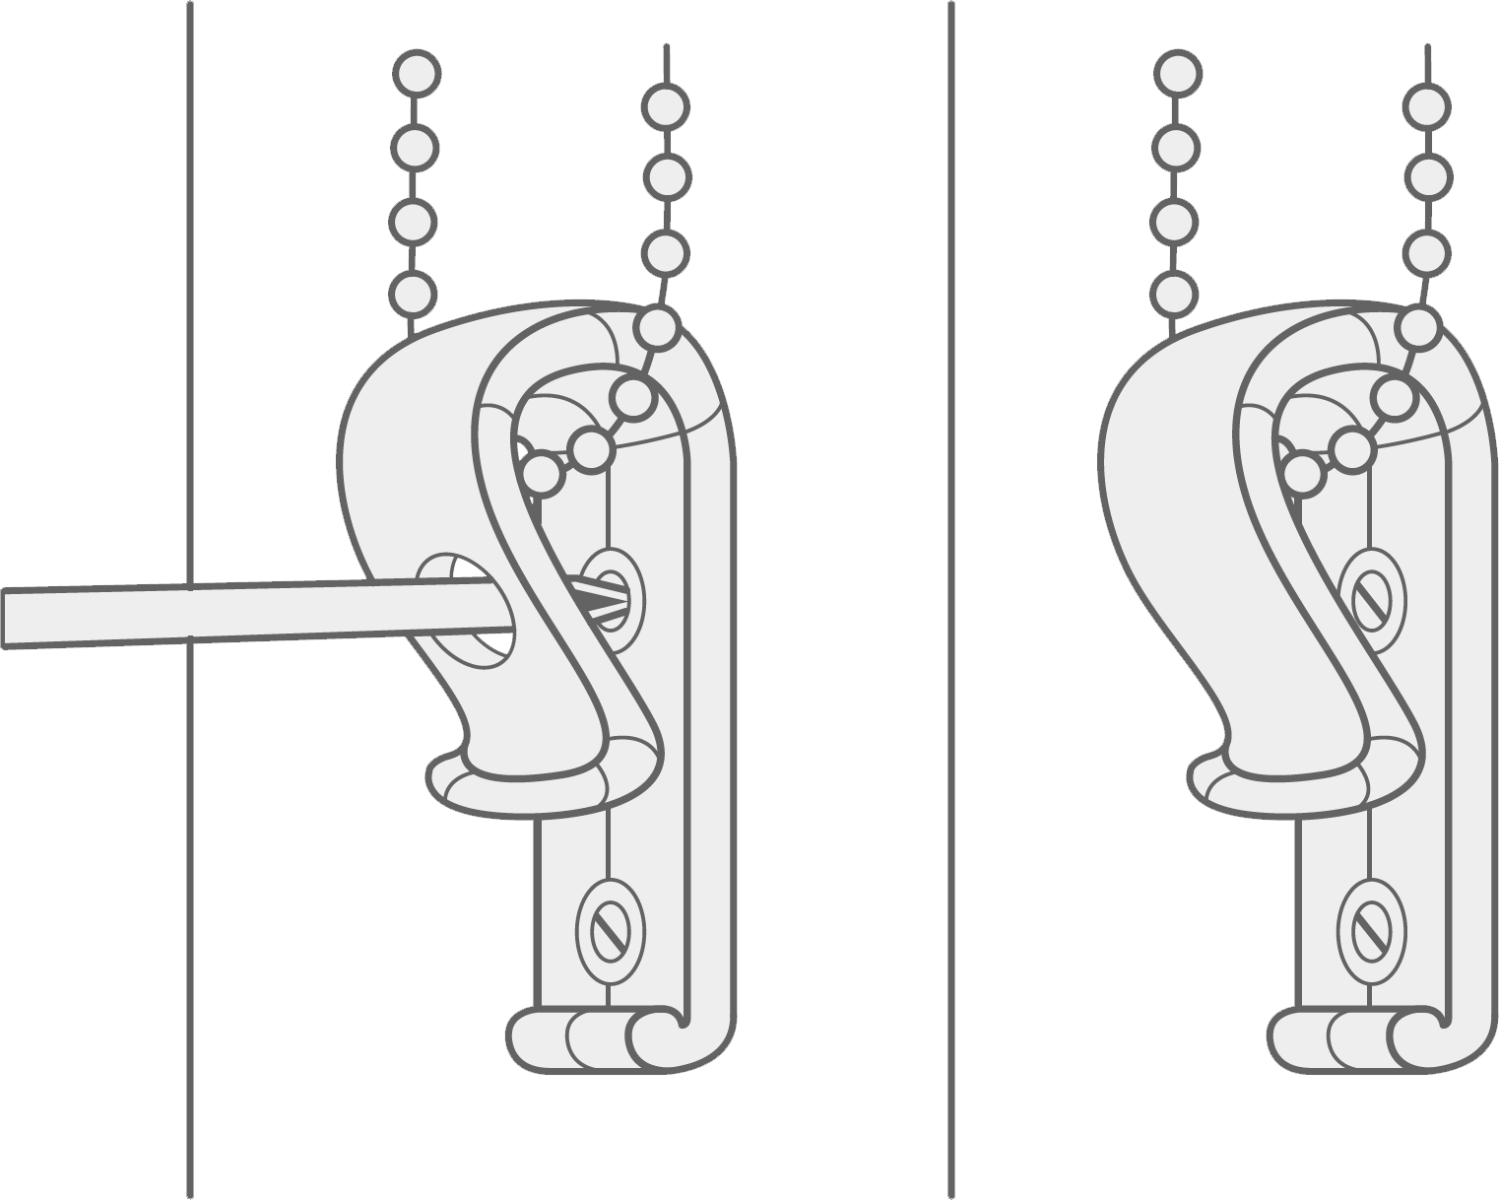 A diagram showing how to install the child safety clip 